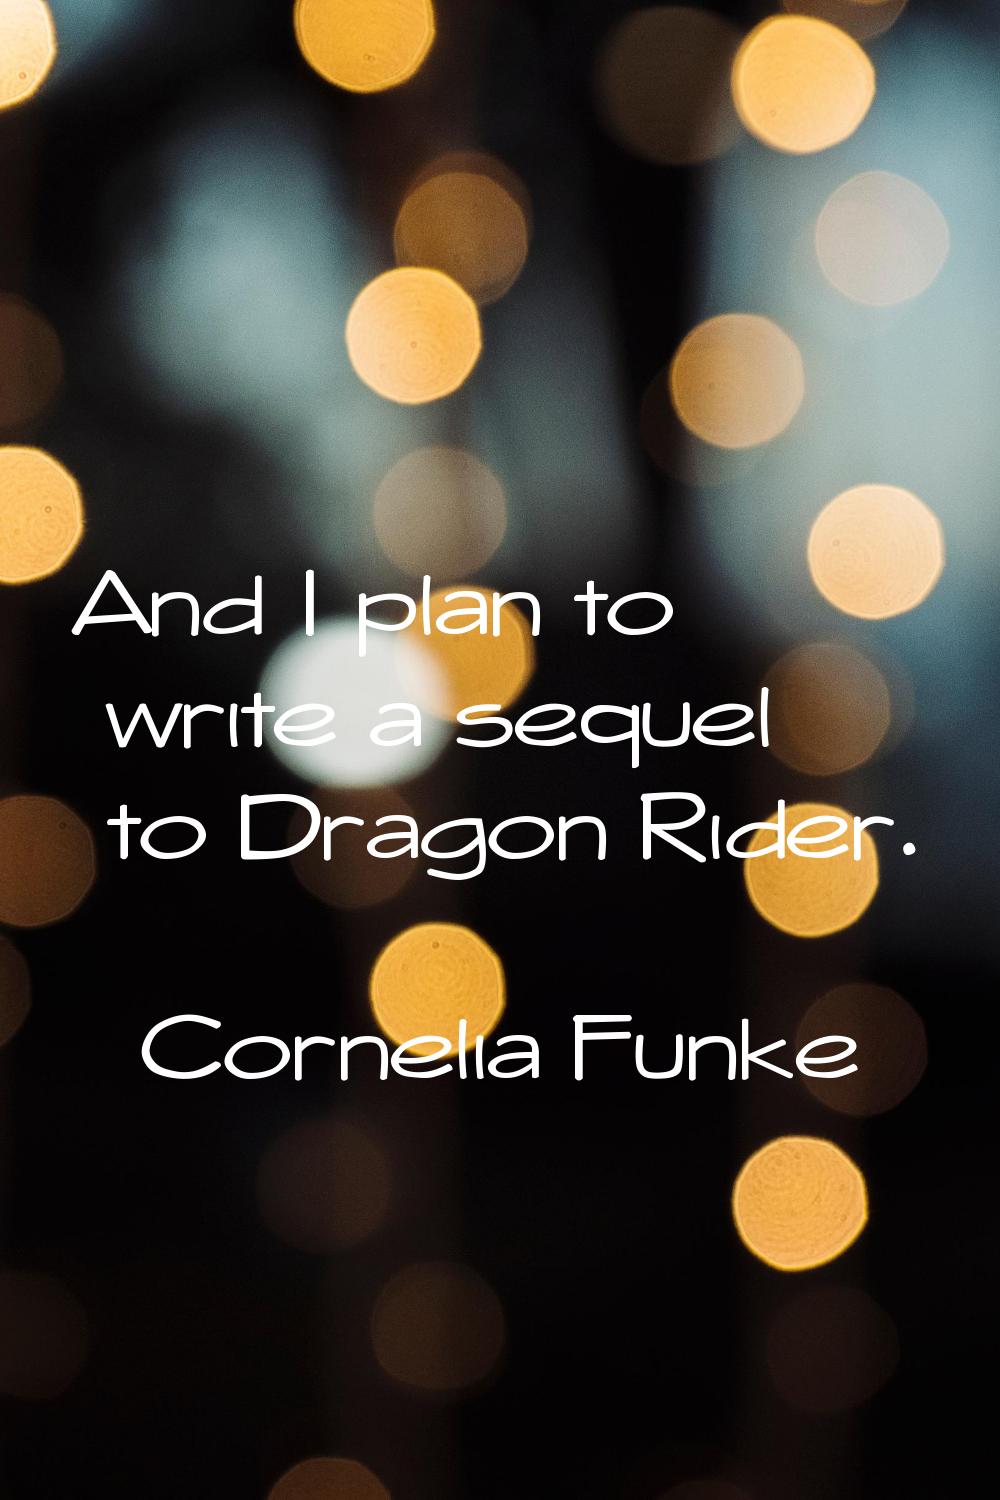 And I plan to write a sequel to Dragon Rider.